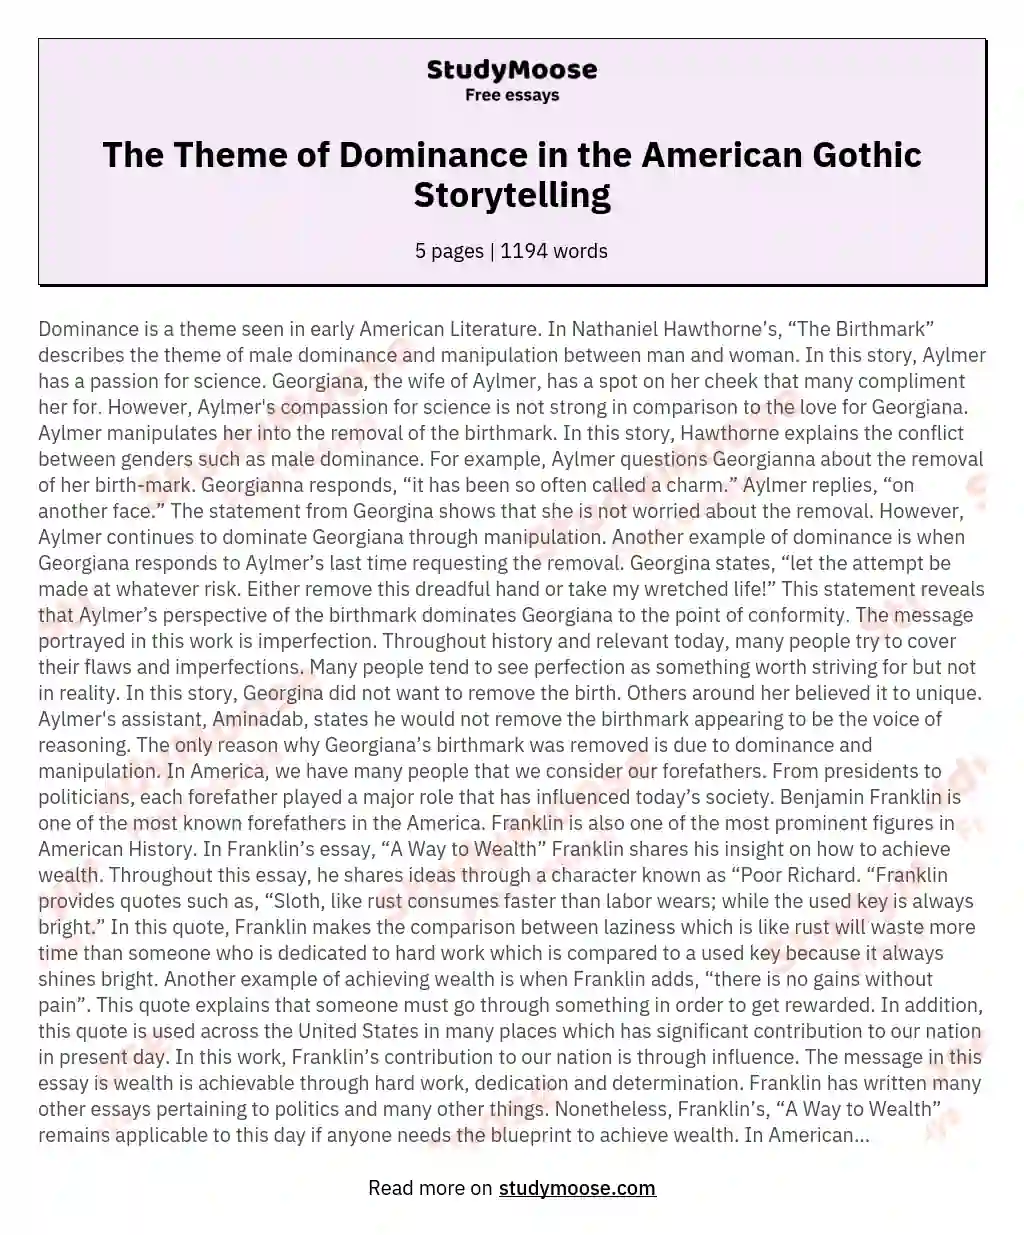 The Theme of Dominance in the American Gothic Storytelling essay